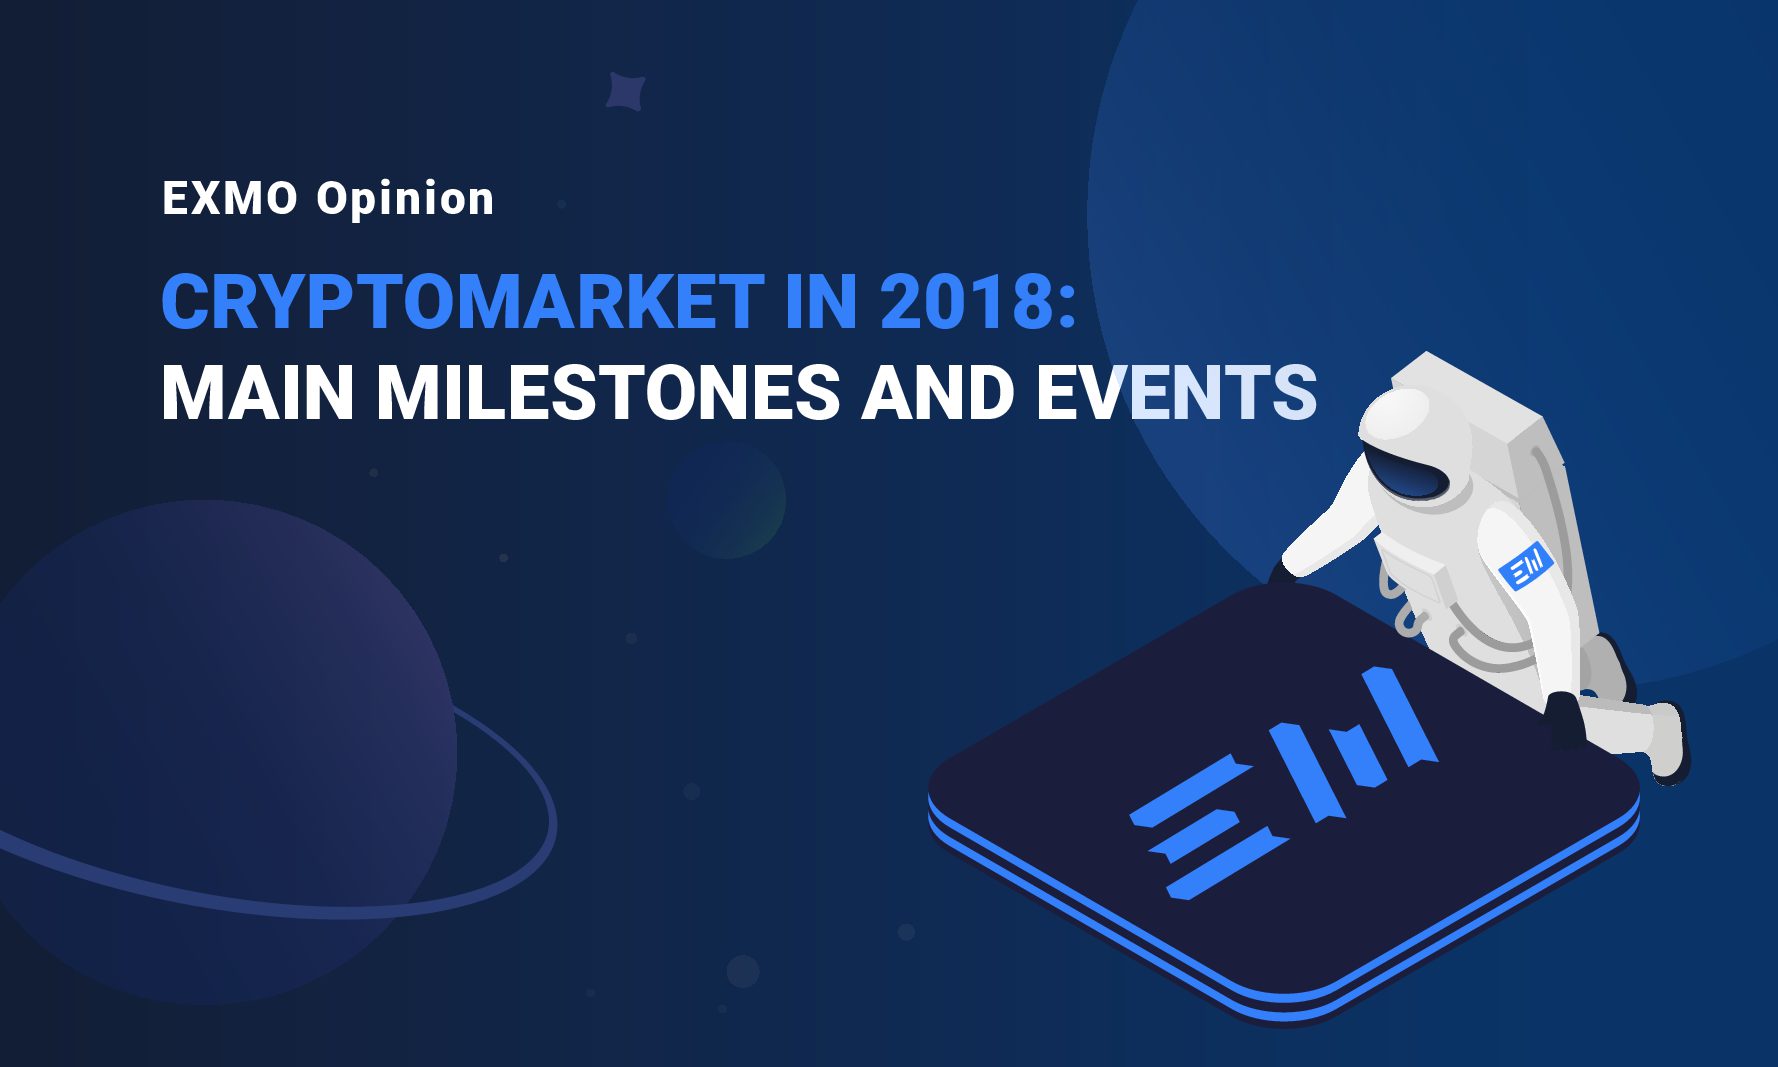 Cryptomarket in 2018: main milestones and events